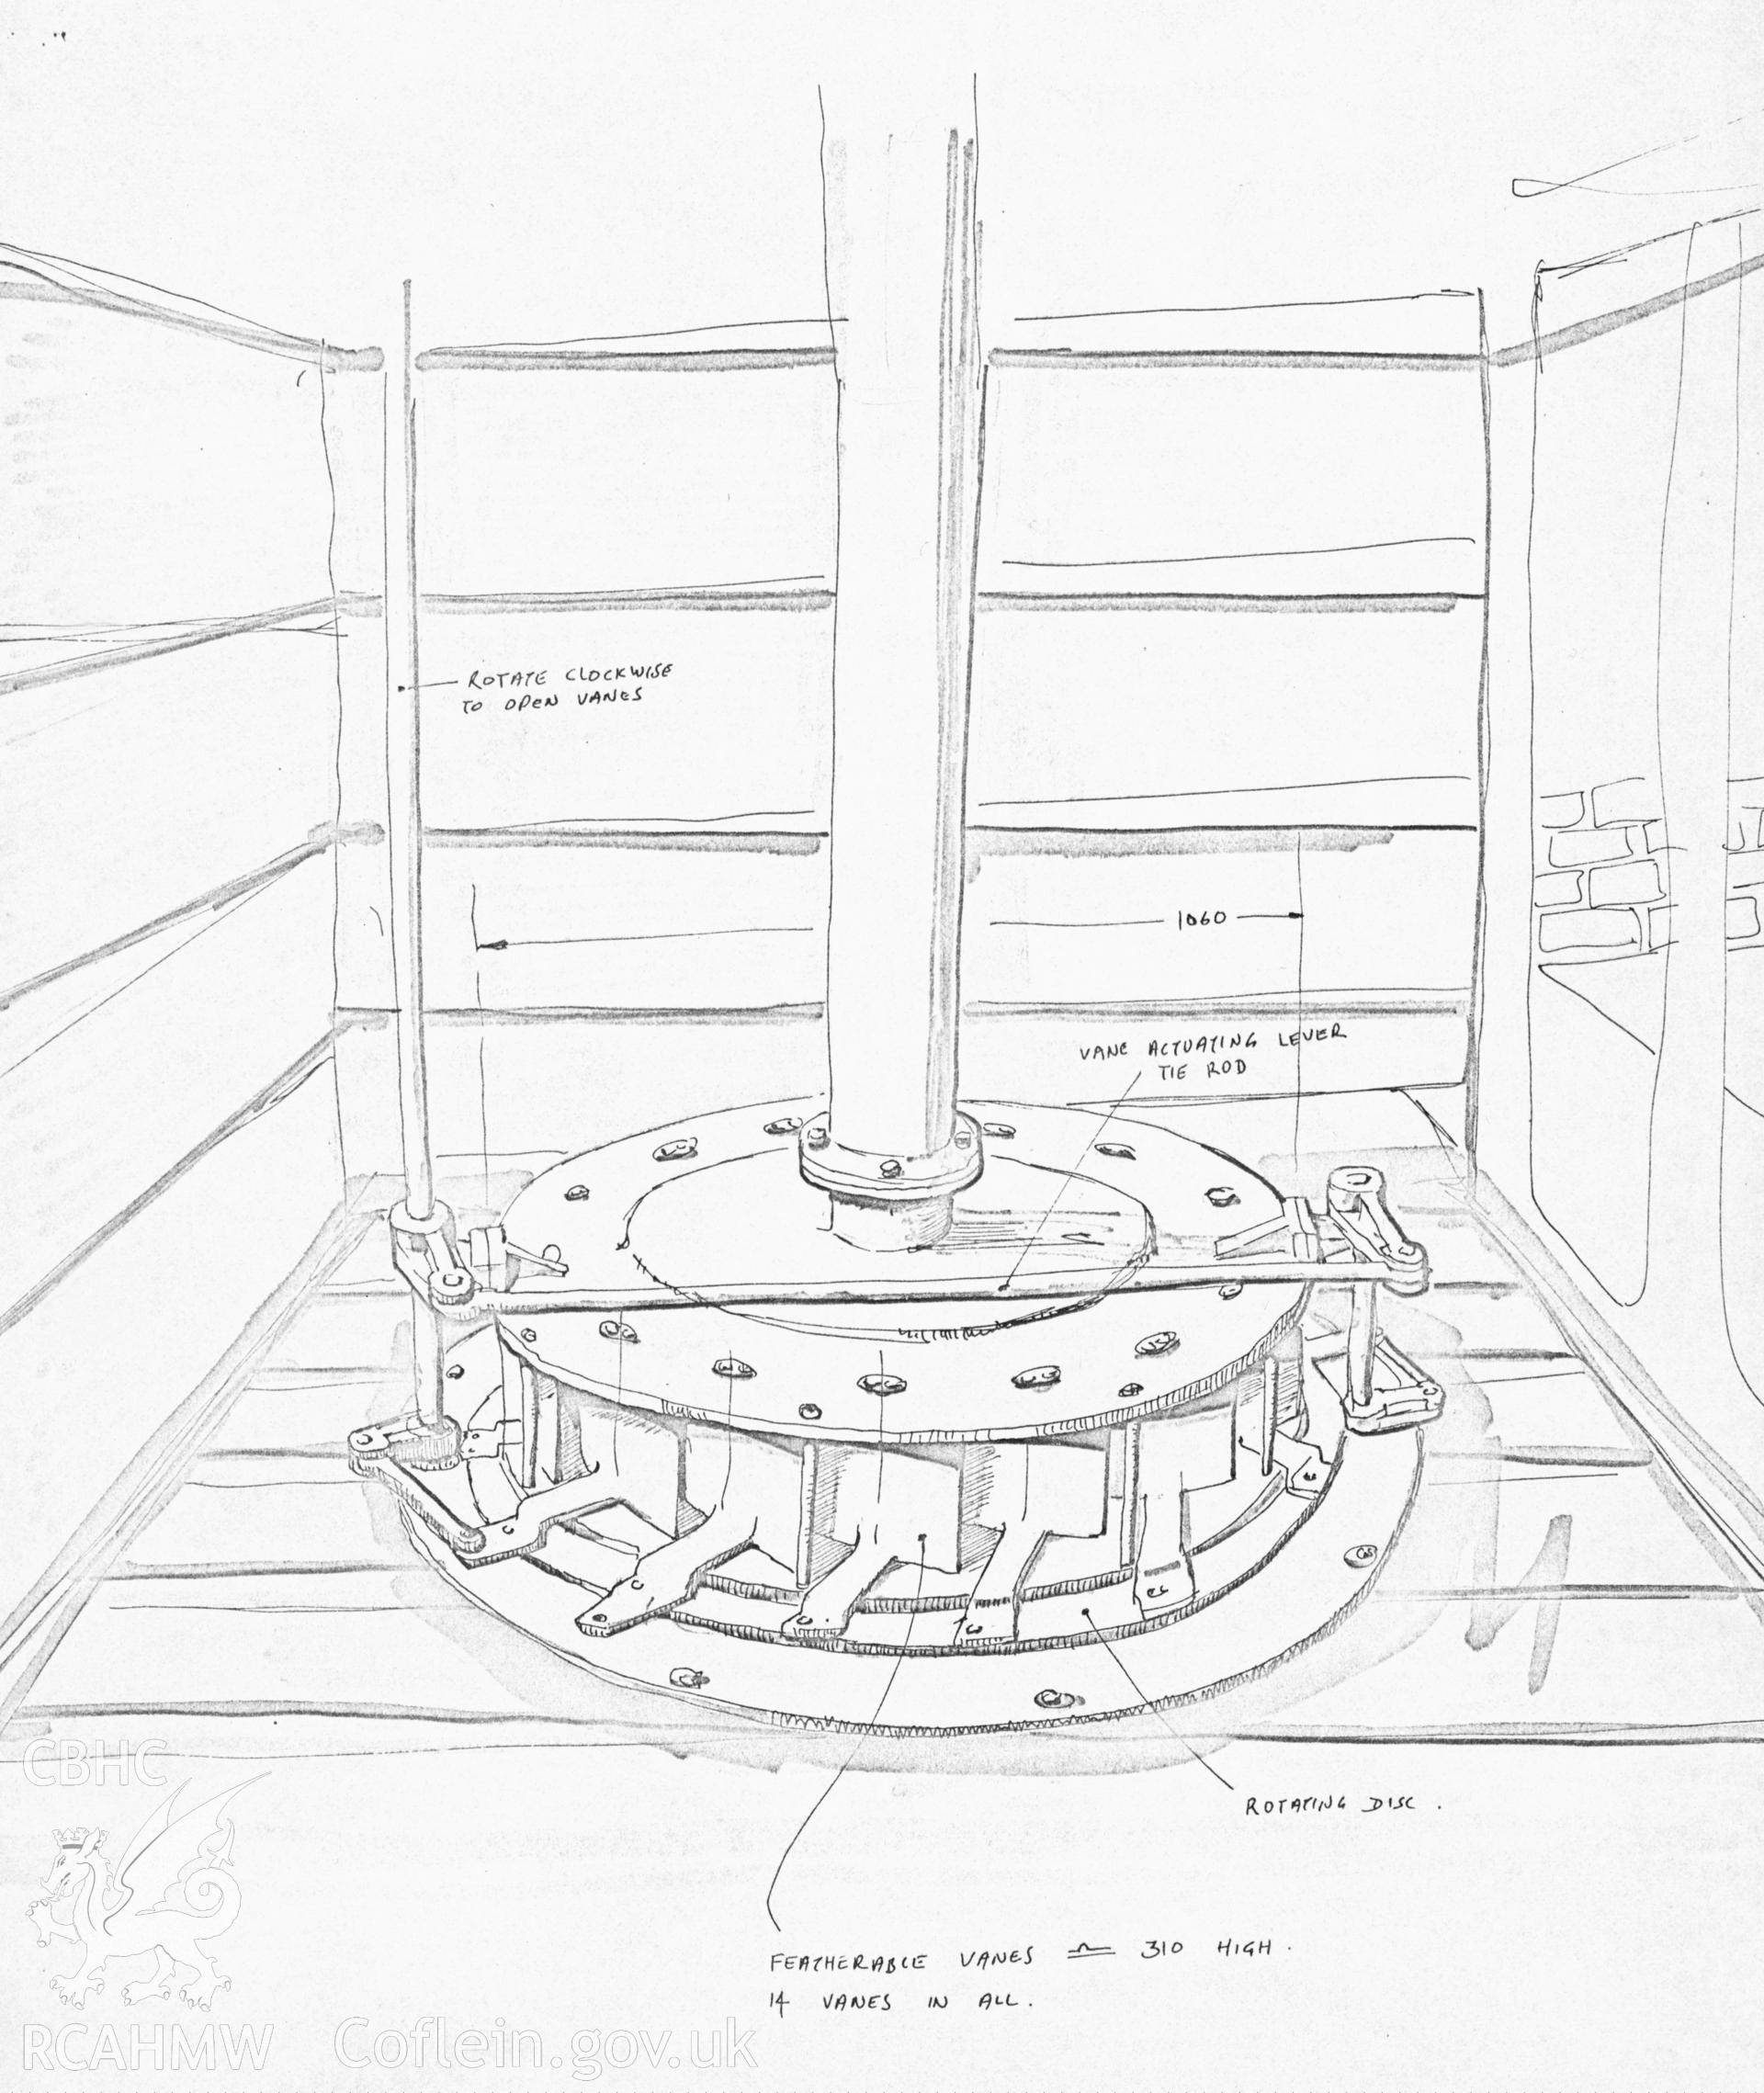 Copy of a measured drawing showing detail of the turbine at Clydach Foundry, produced by J.D. Goodband, 1979.